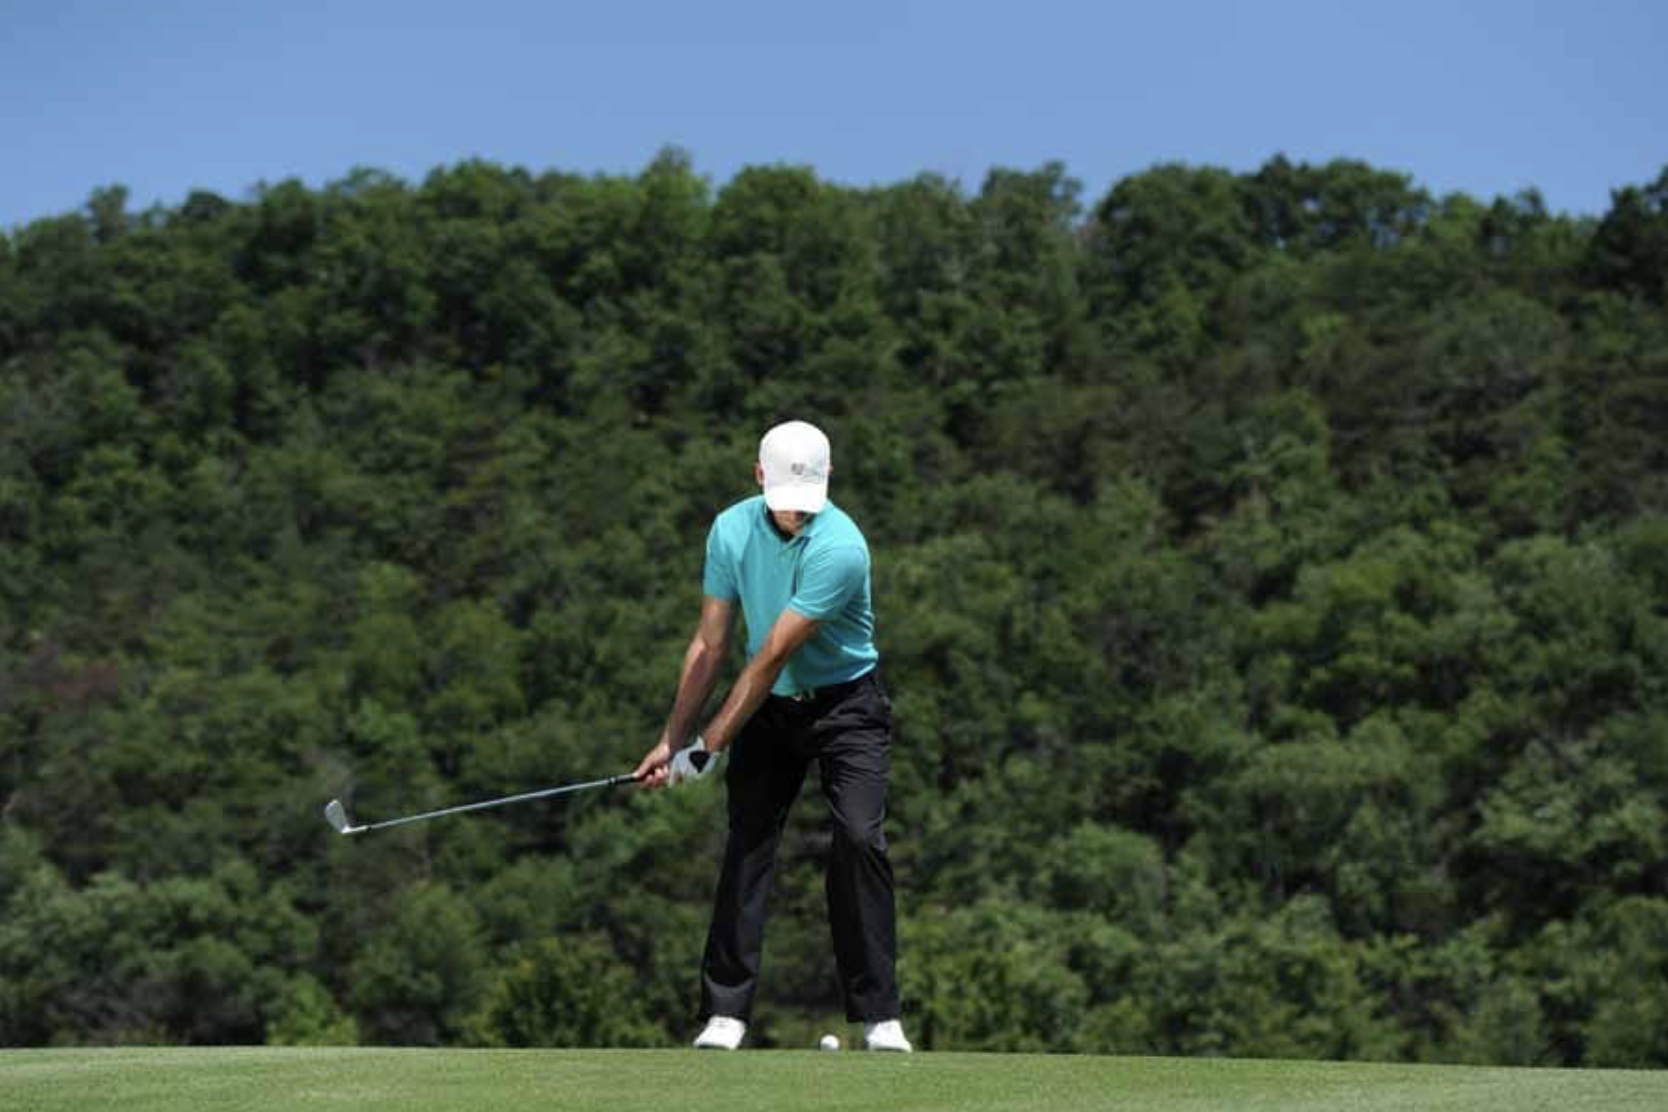 The Swing Sequence in Golf: Mechanics, Steps, and Tips